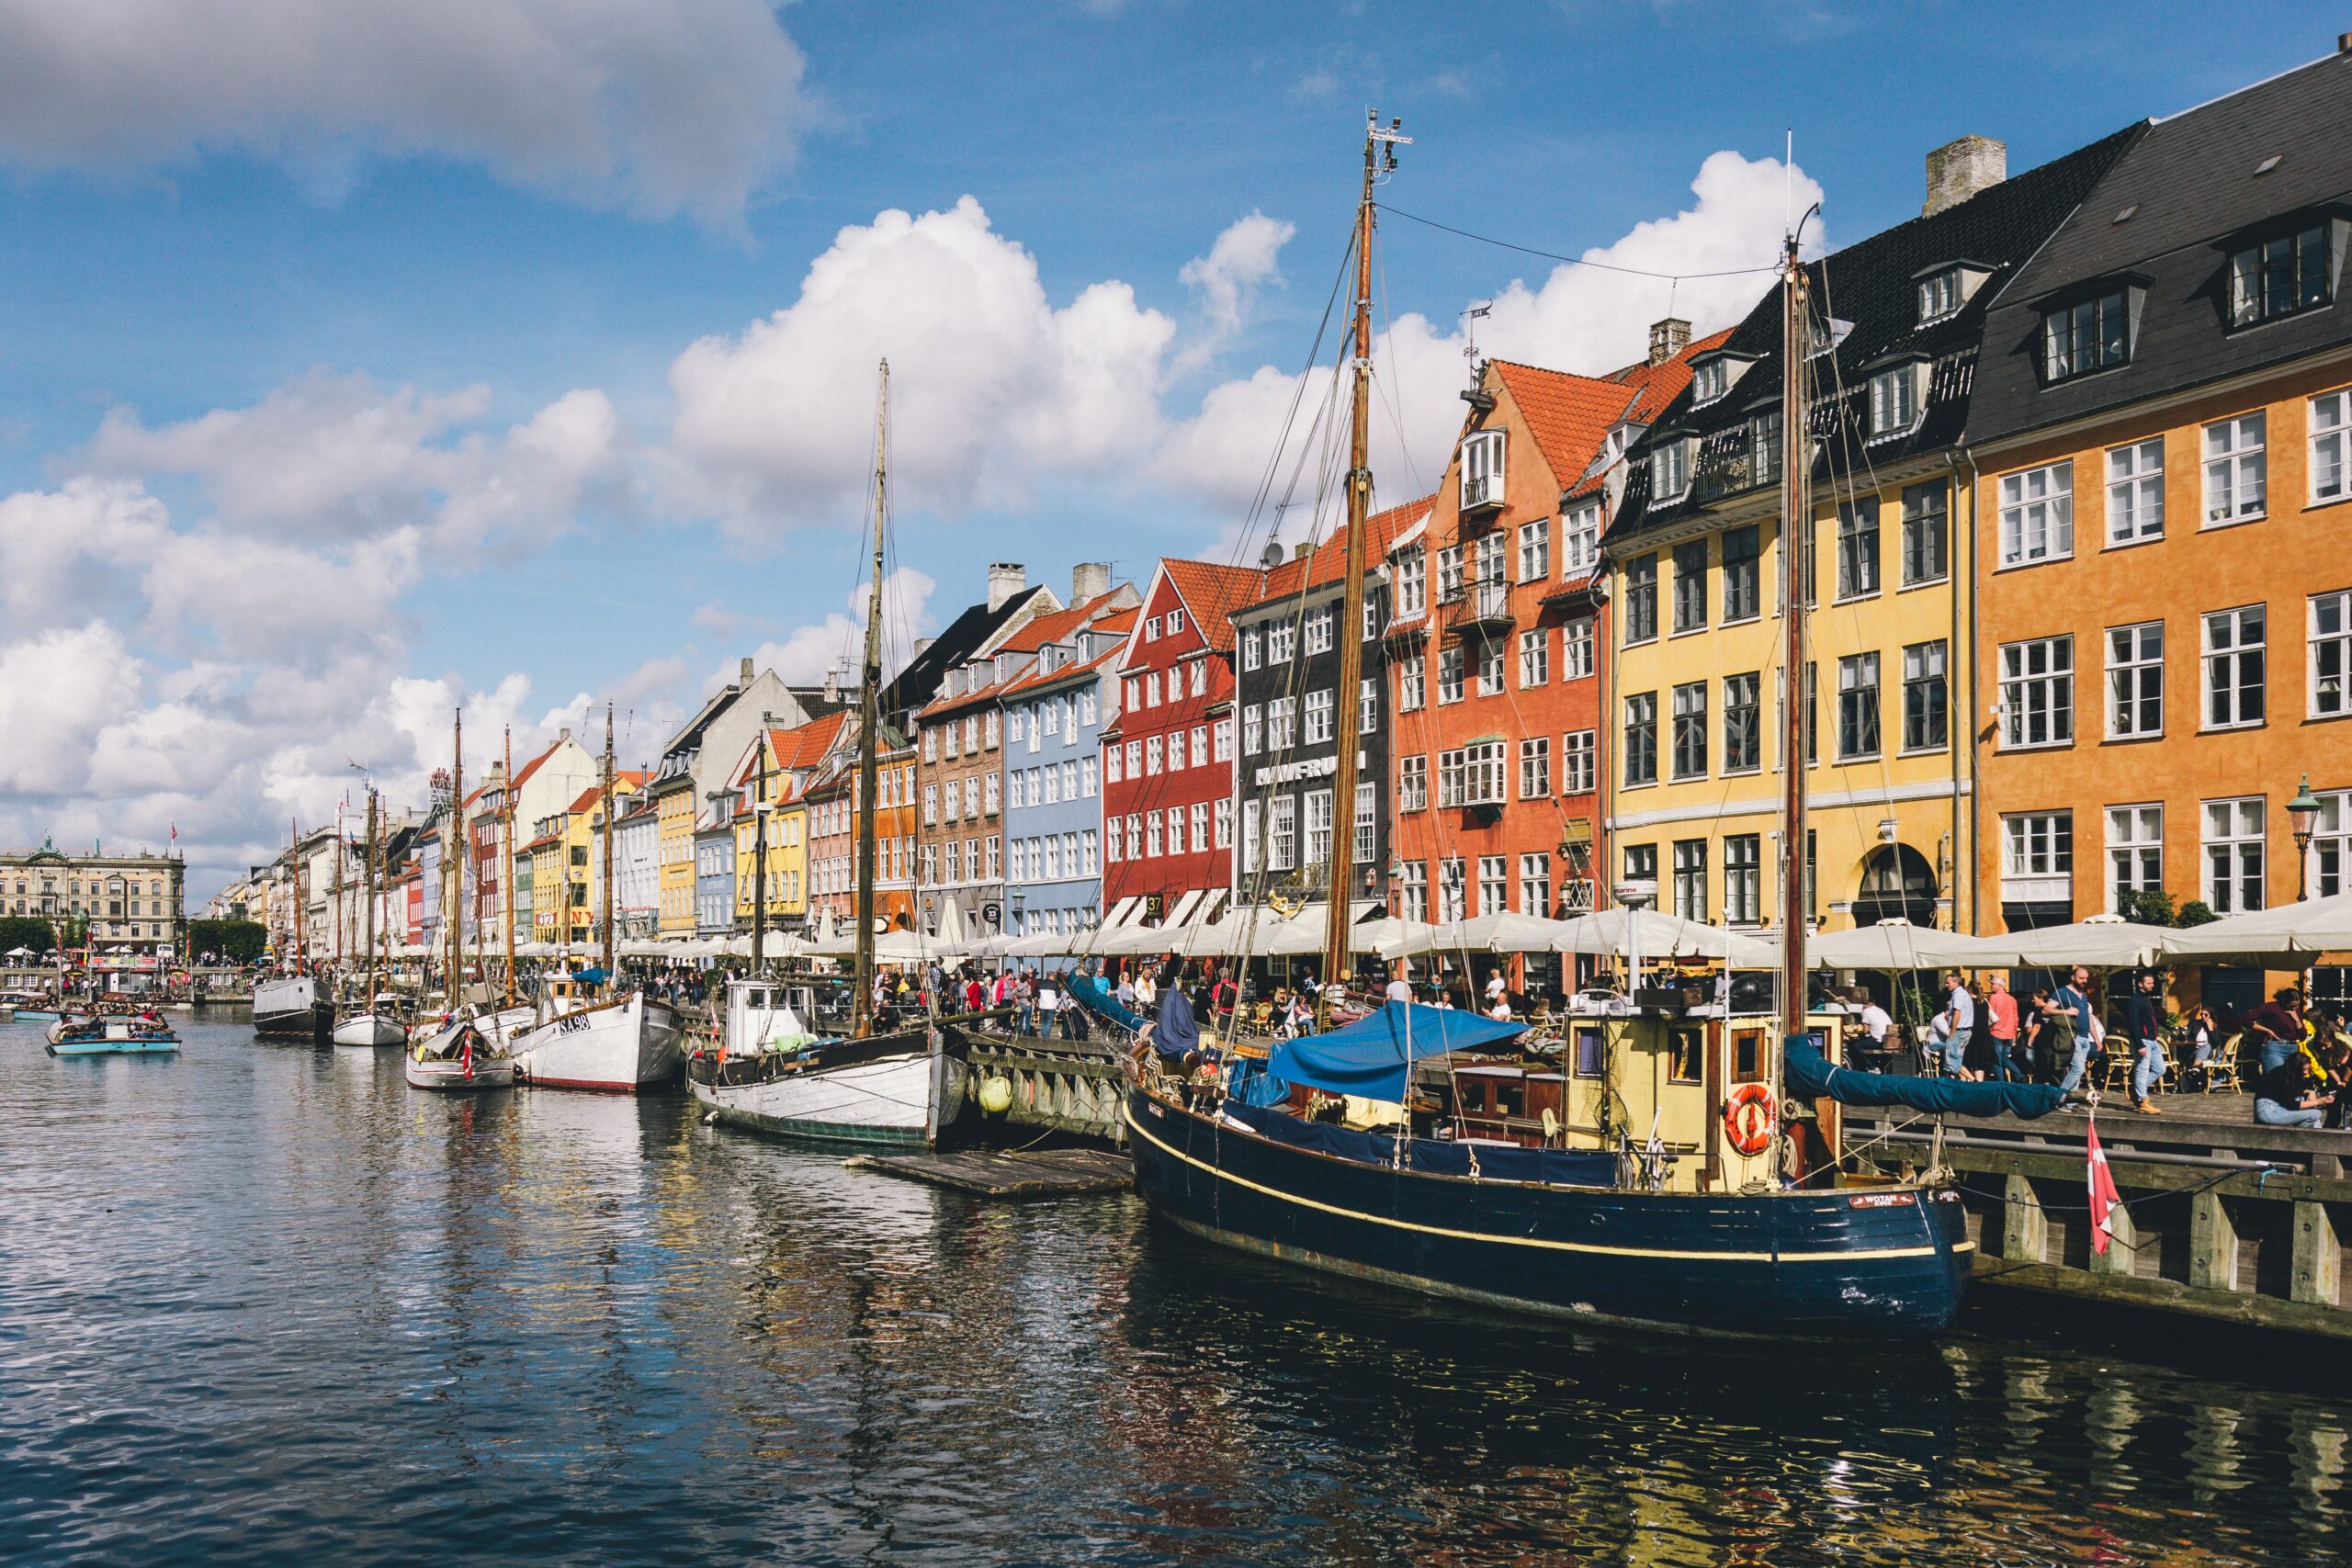 Picture of boats in the canals of Nyhavn, Copenhagen